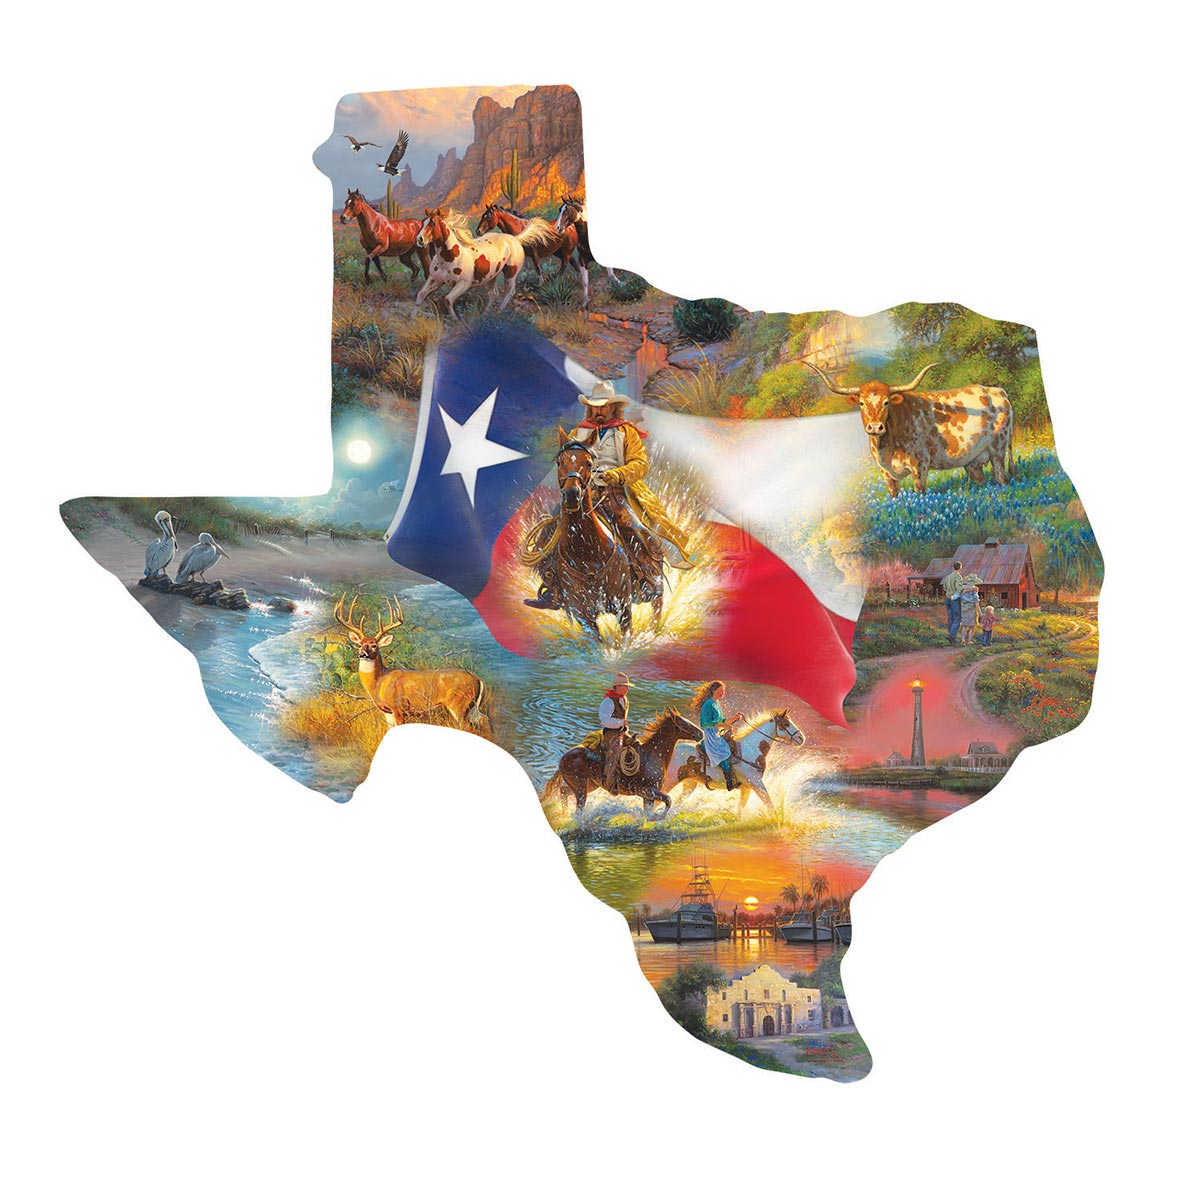 Images of Texas Collage Shaped Puzzle